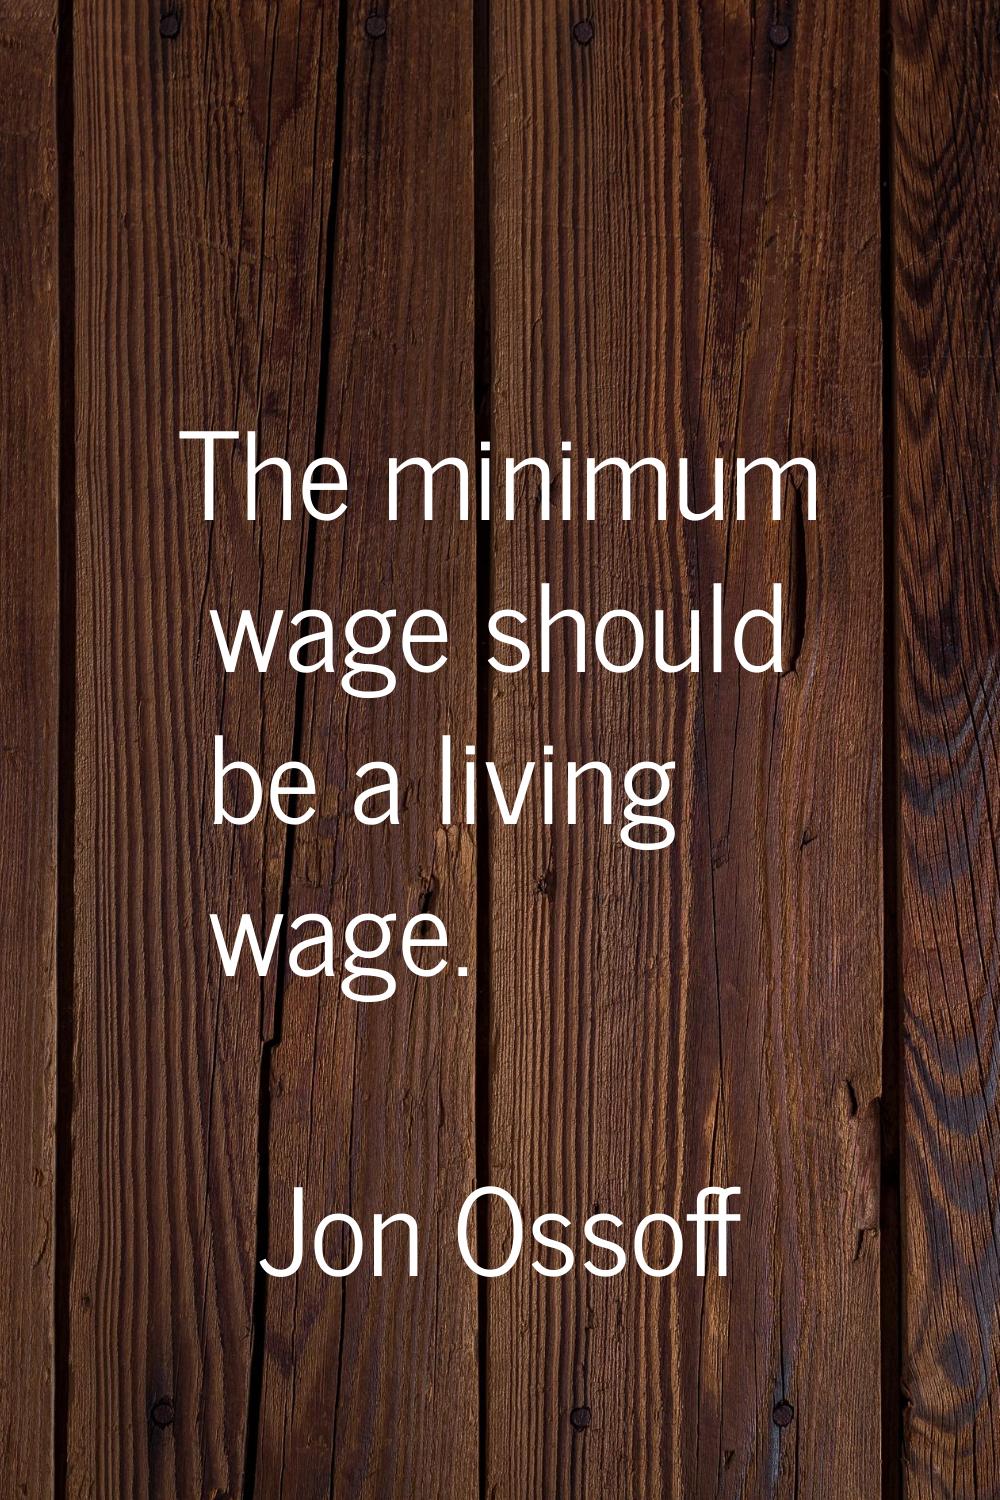 The minimum wage should be a living wage.